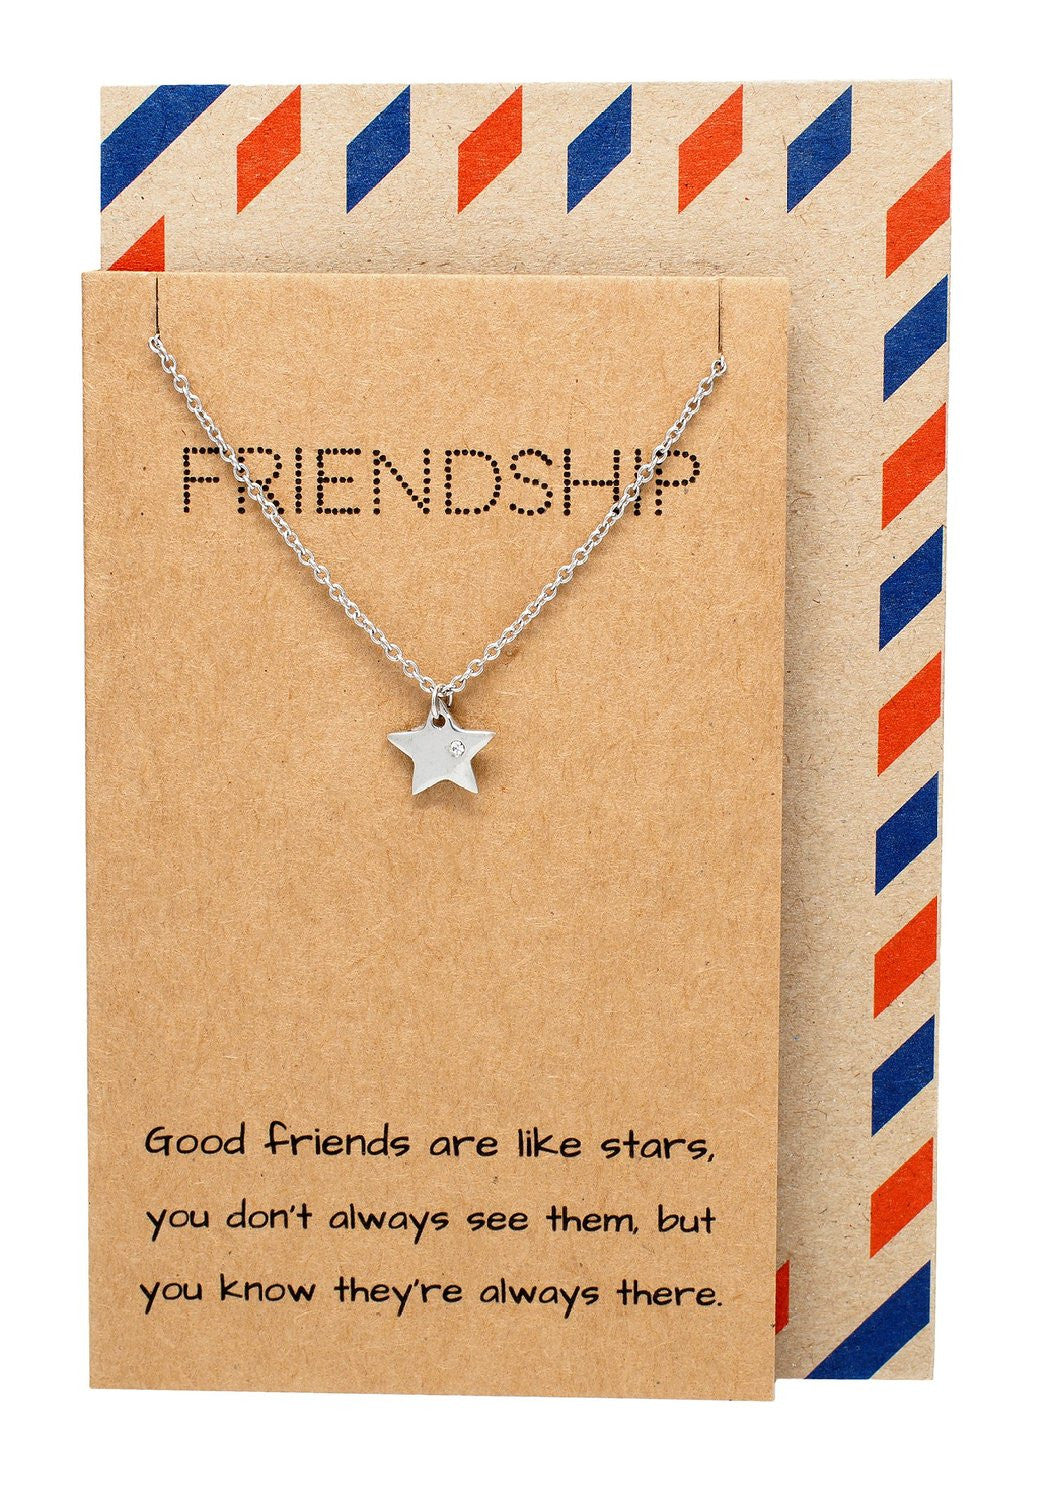 Macy Best Friend Necklaces with Matching Star Pendant, Friendship